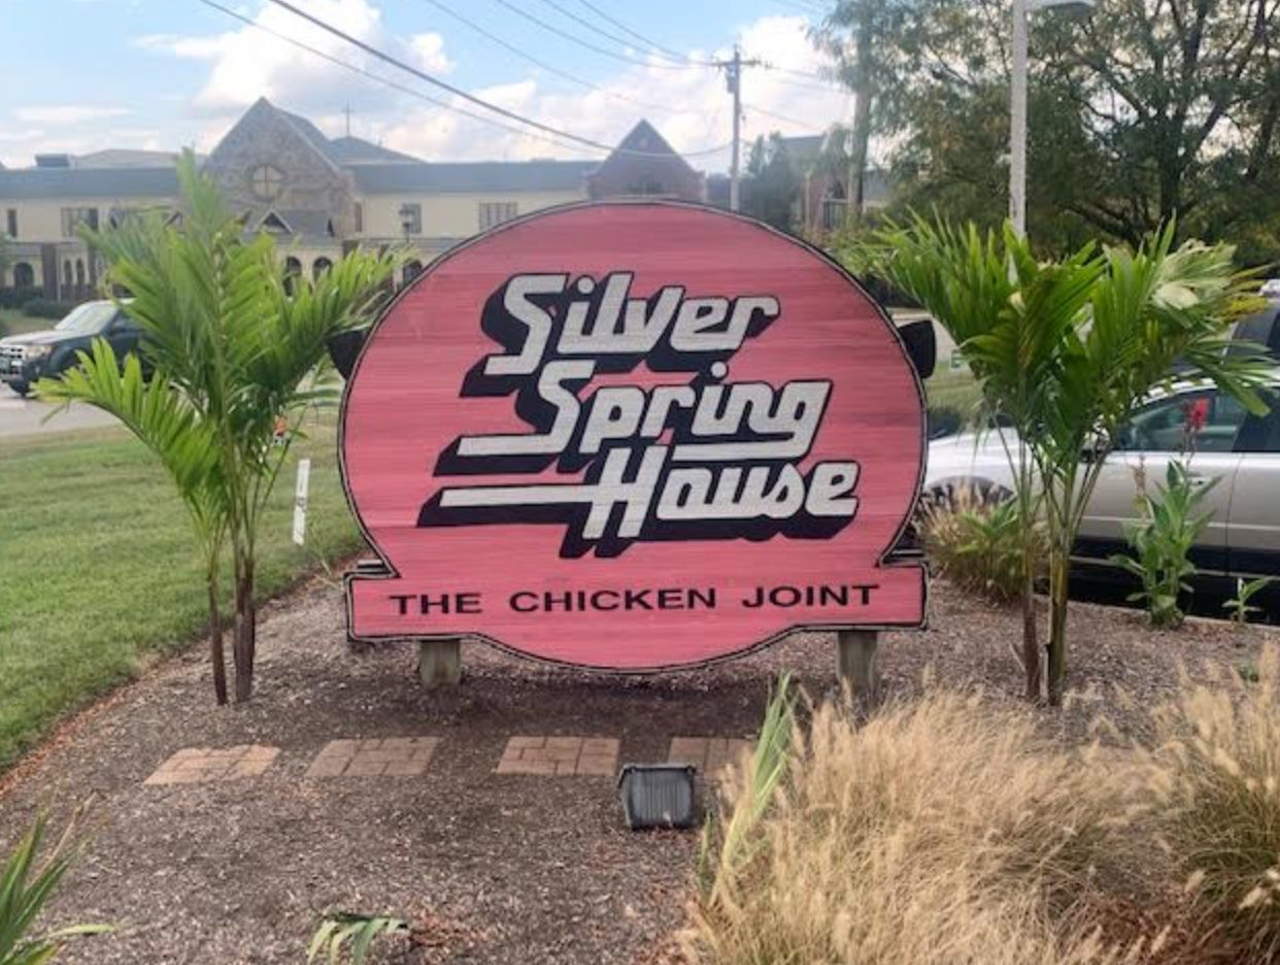 No. 3 Best Chicken: Silver Spring House
8322 E. Kemper Rd., Symmes Township